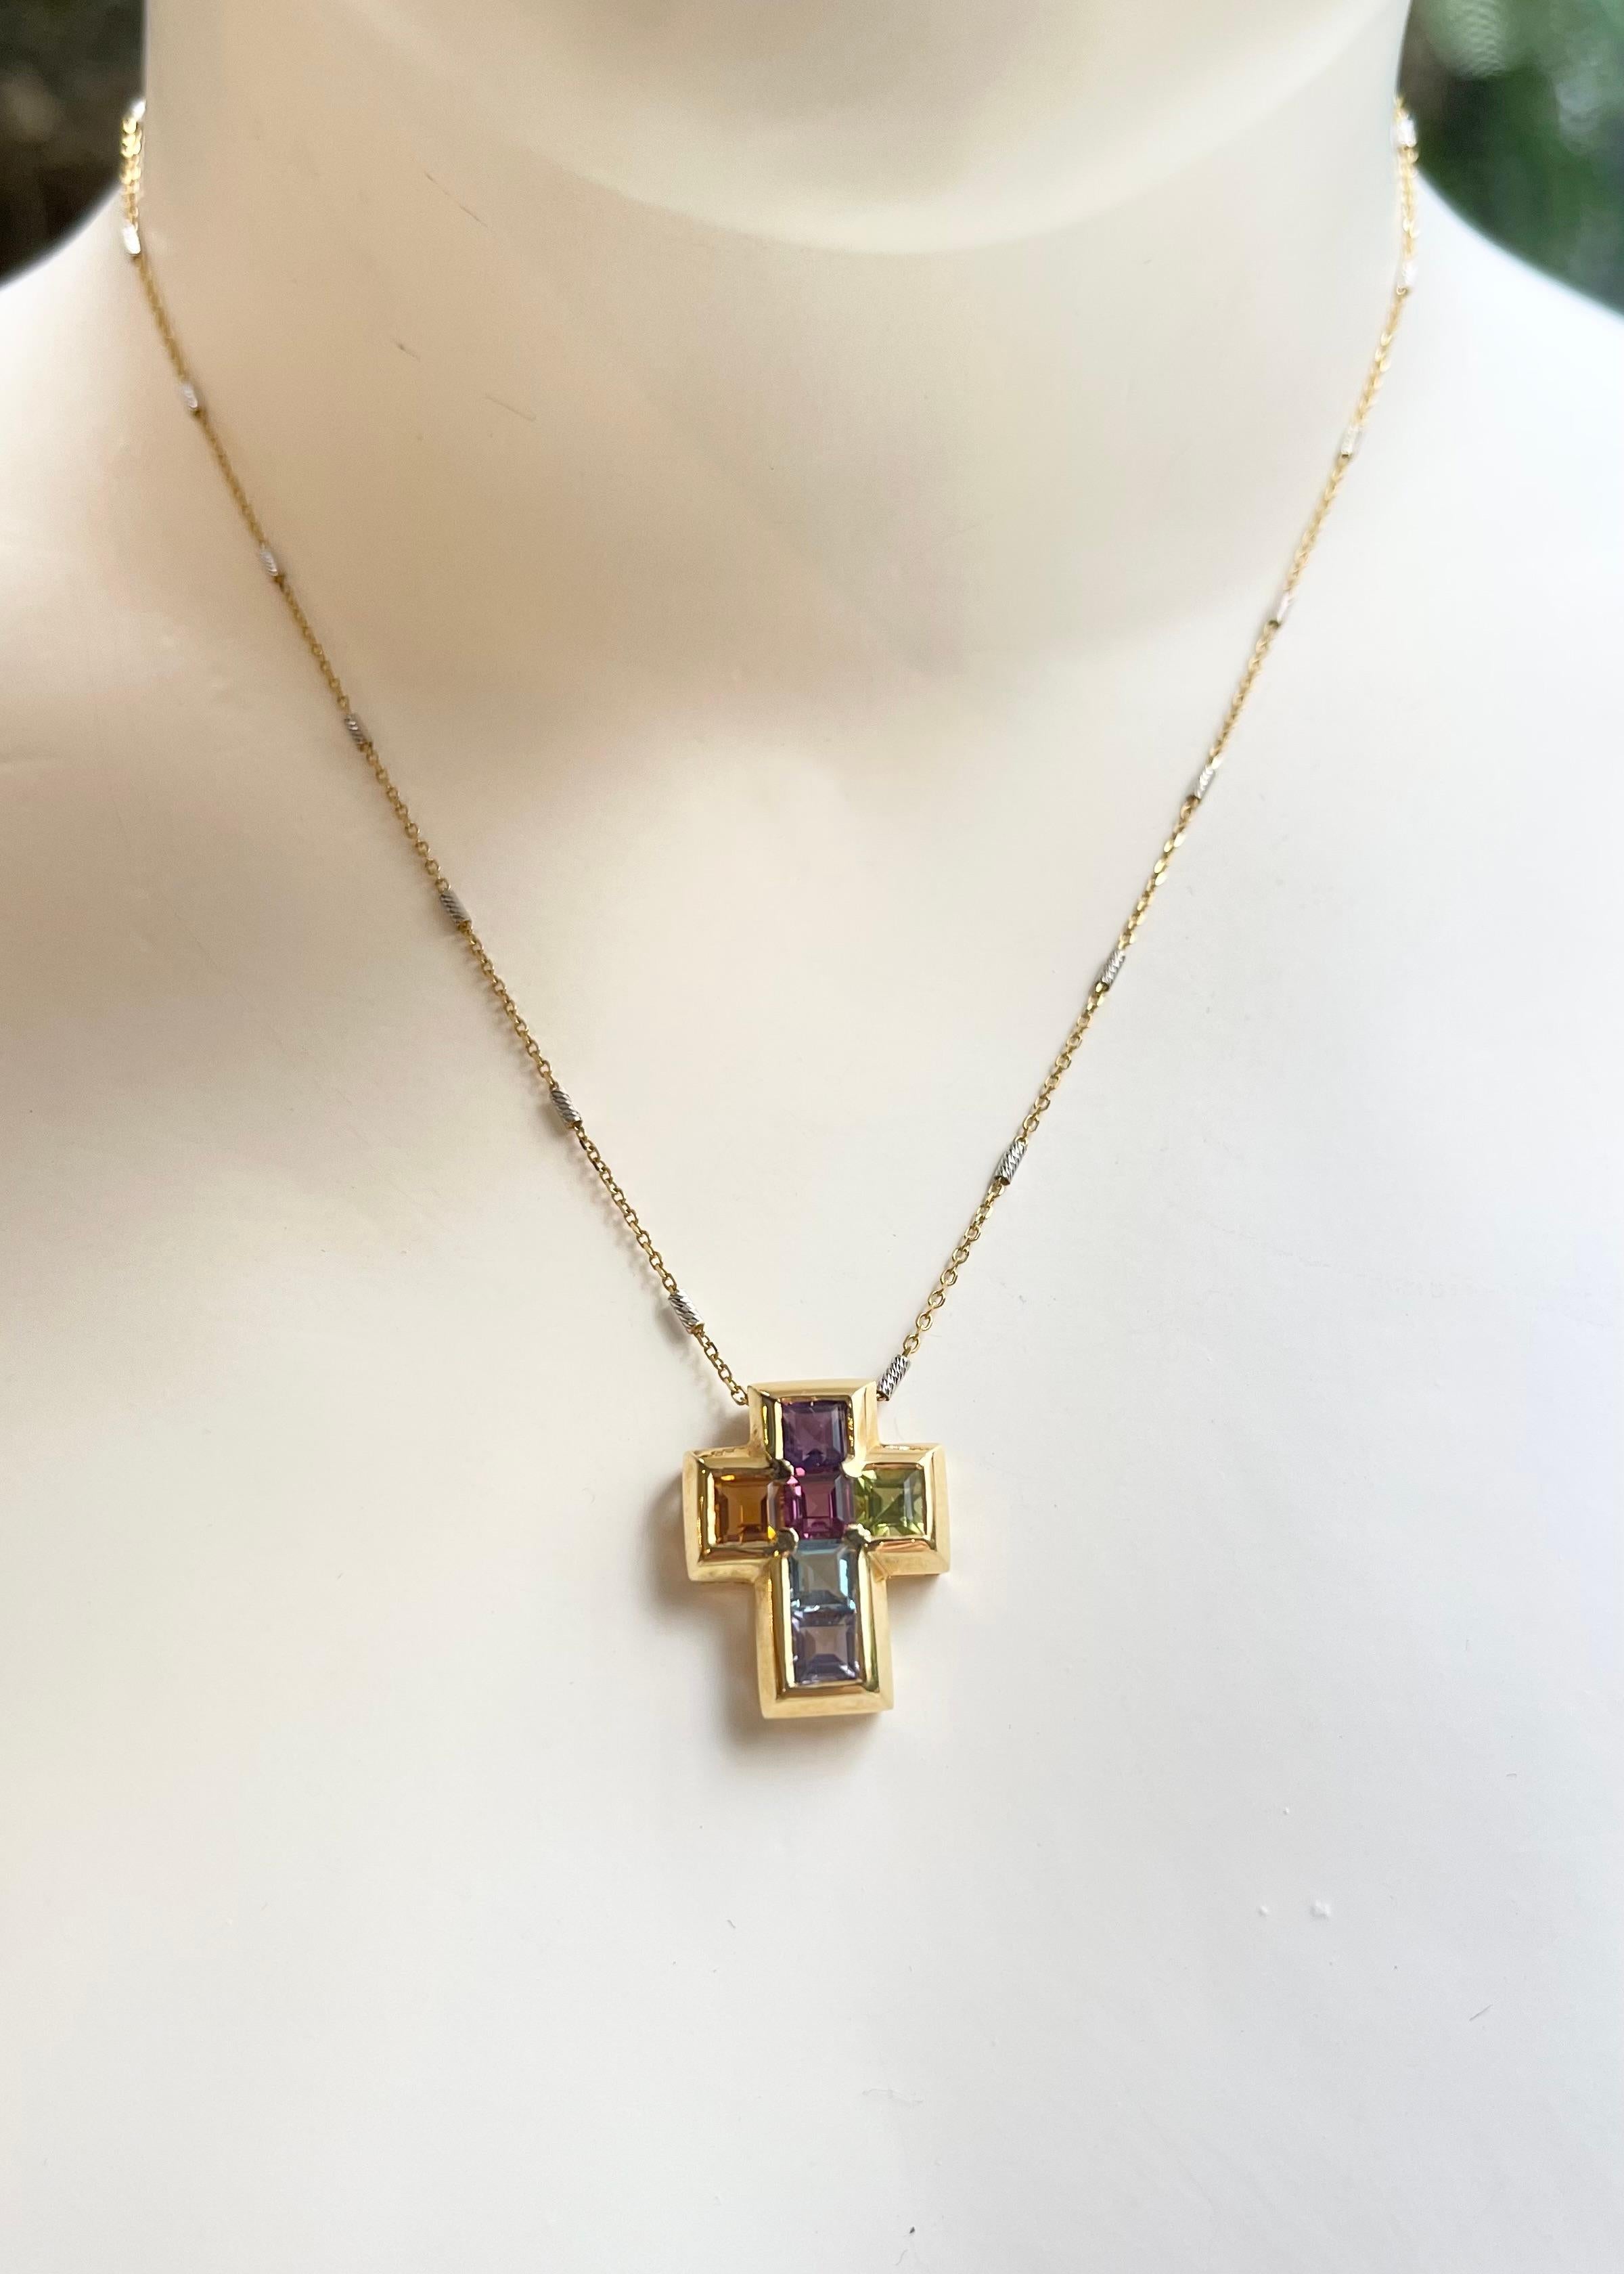 Rainbow Color Semi- Precious Stone 2.40 carats Cross Pendant set in 14K Gold Settings
(chain not included)

Width: 1.6 cm 
Length: 2.0 cm
Total Weight: 2.43 grams

